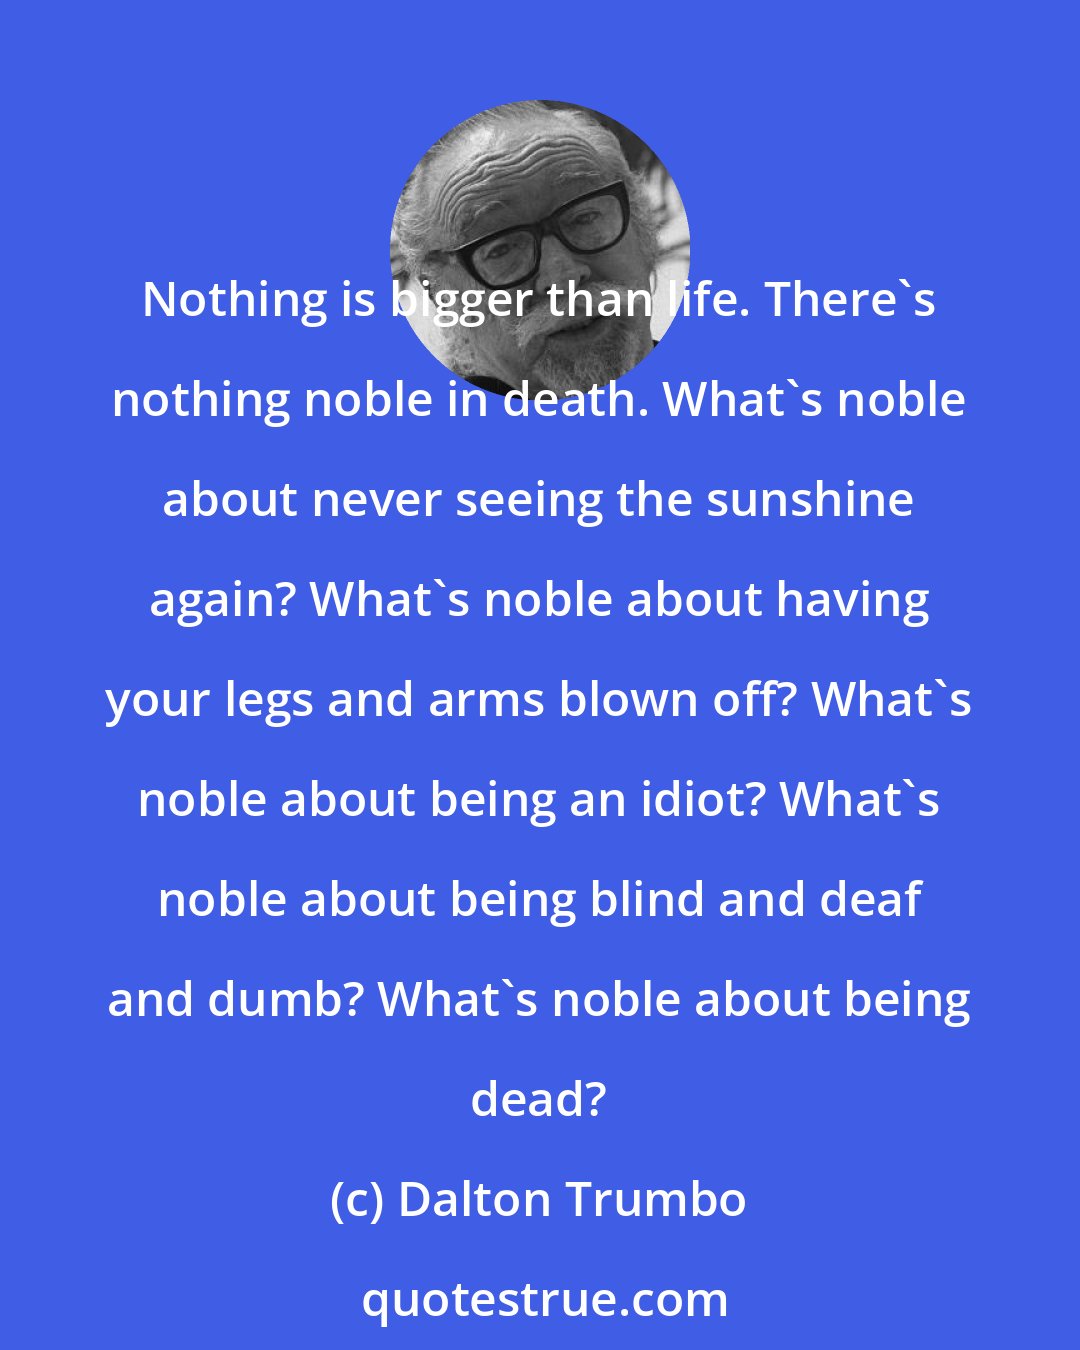 Dalton Trumbo: Nothing is bigger than life. There's nothing noble in death. What's noble about never seeing the sunshine again? What's noble about having your legs and arms blown off? What's noble about being an idiot? What's noble about being blind and deaf and dumb? What's noble about being dead?